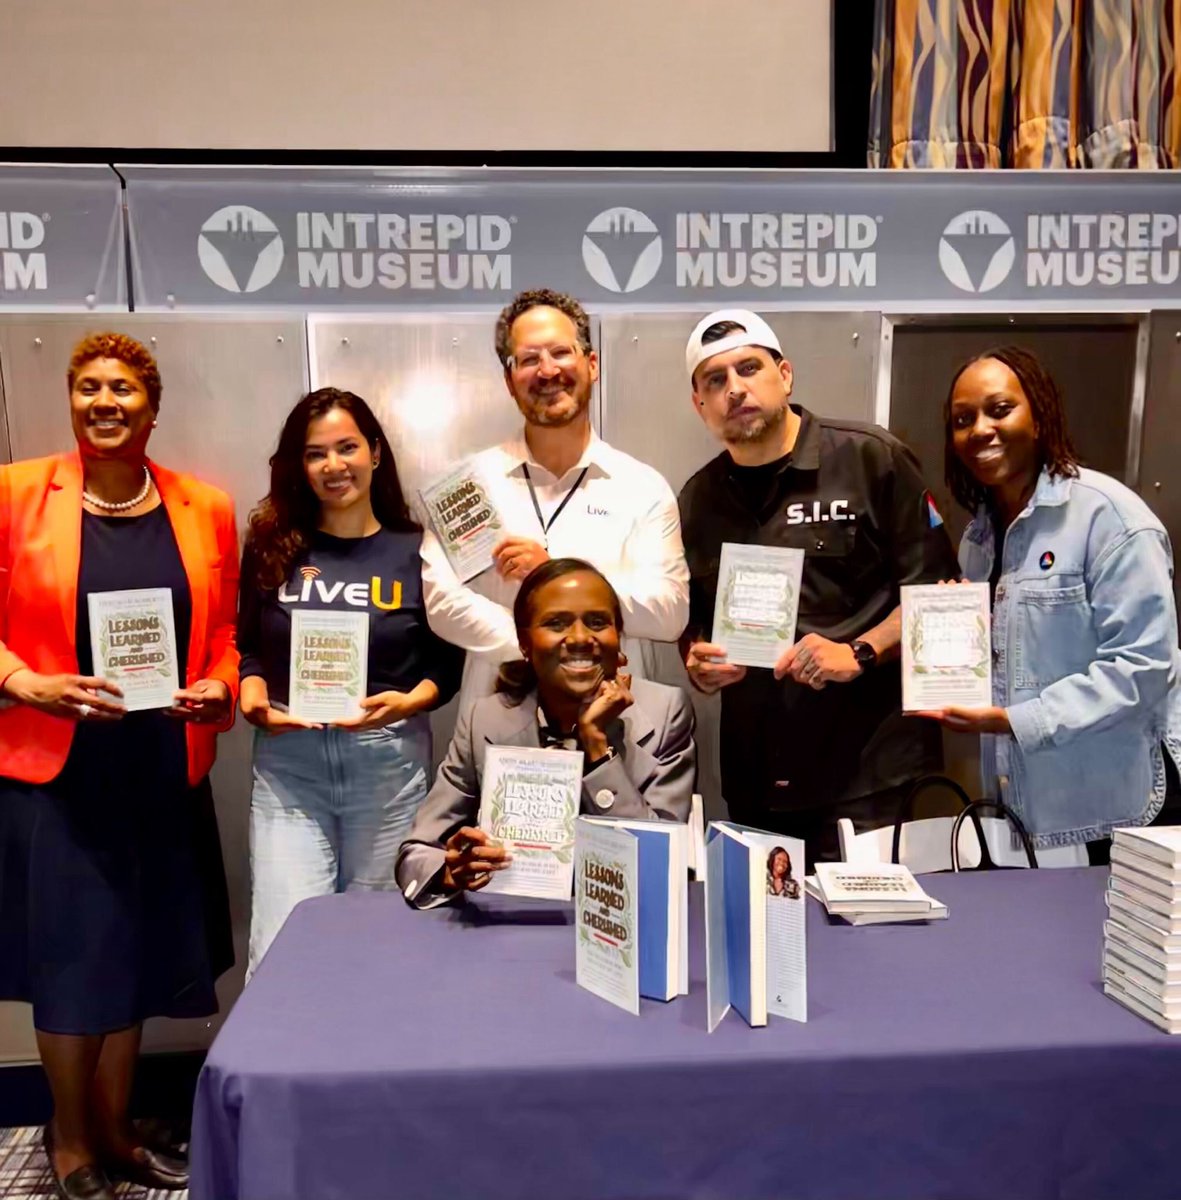 Our team had an amazing time helping @sicfilmschool produce a live stream featuring @DebRobertsABC book signing w/ NYC students at the @IntrepidMuseum! Our tech withstood - even with a ton of aircraft carrier steel. Reliable and unlimited - every time. #LiveU #StreamingSuccess